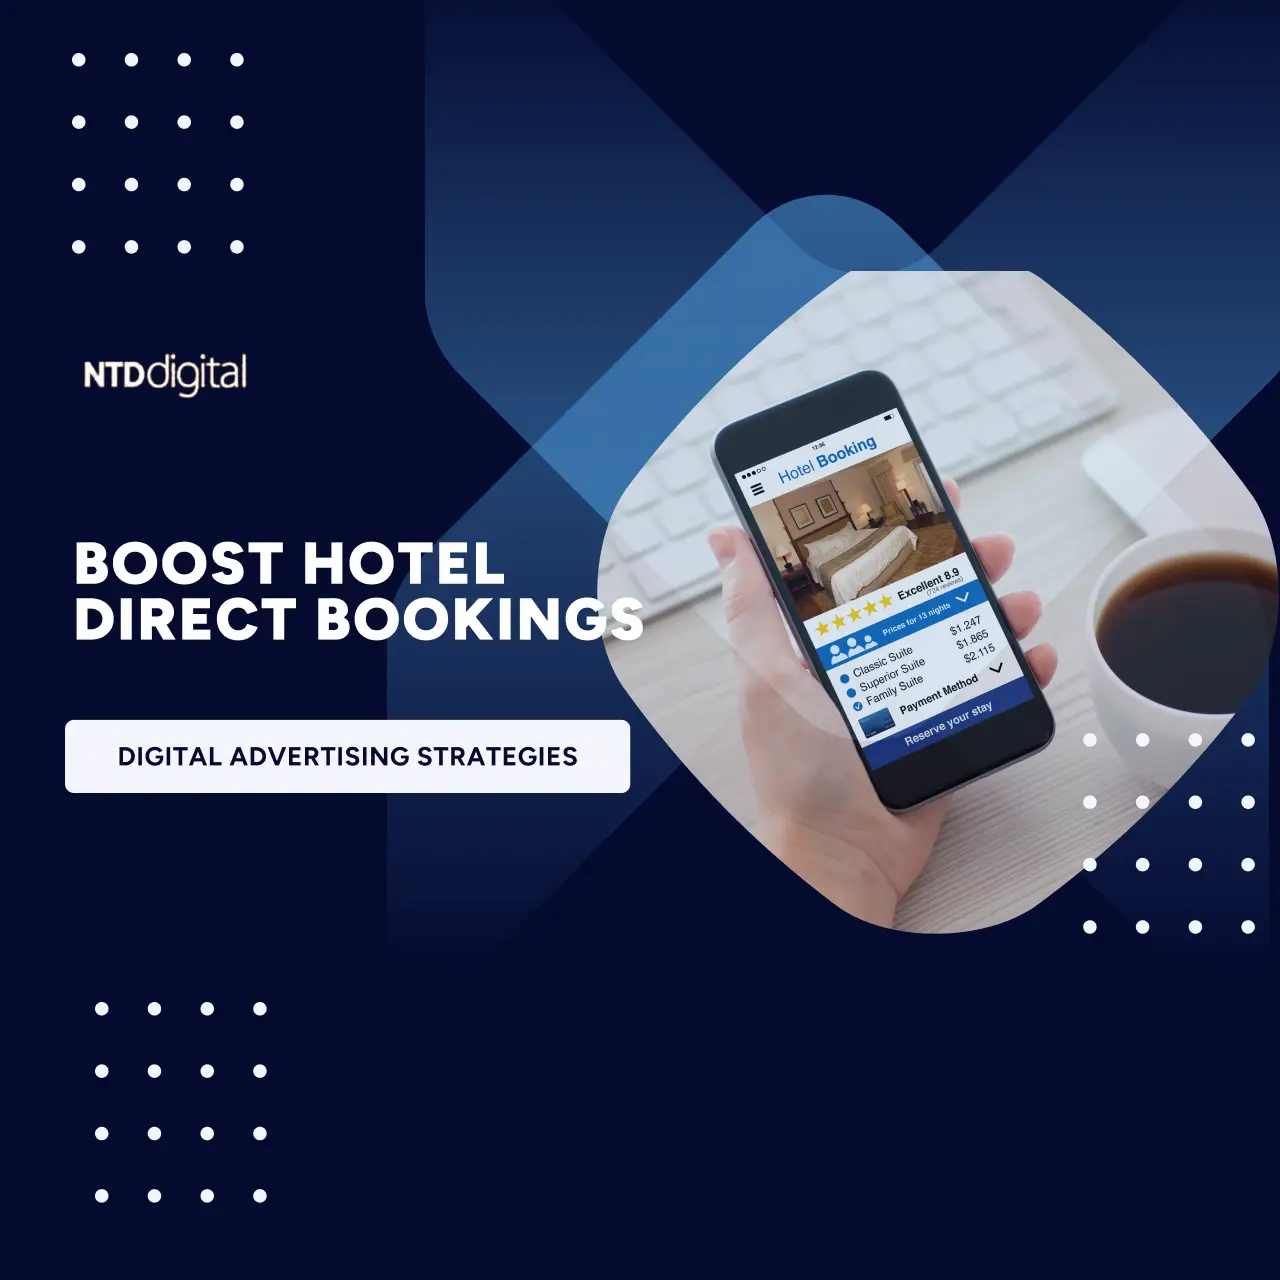 Digital Advertising Strategies to Increase Direct Bookings for Hotels